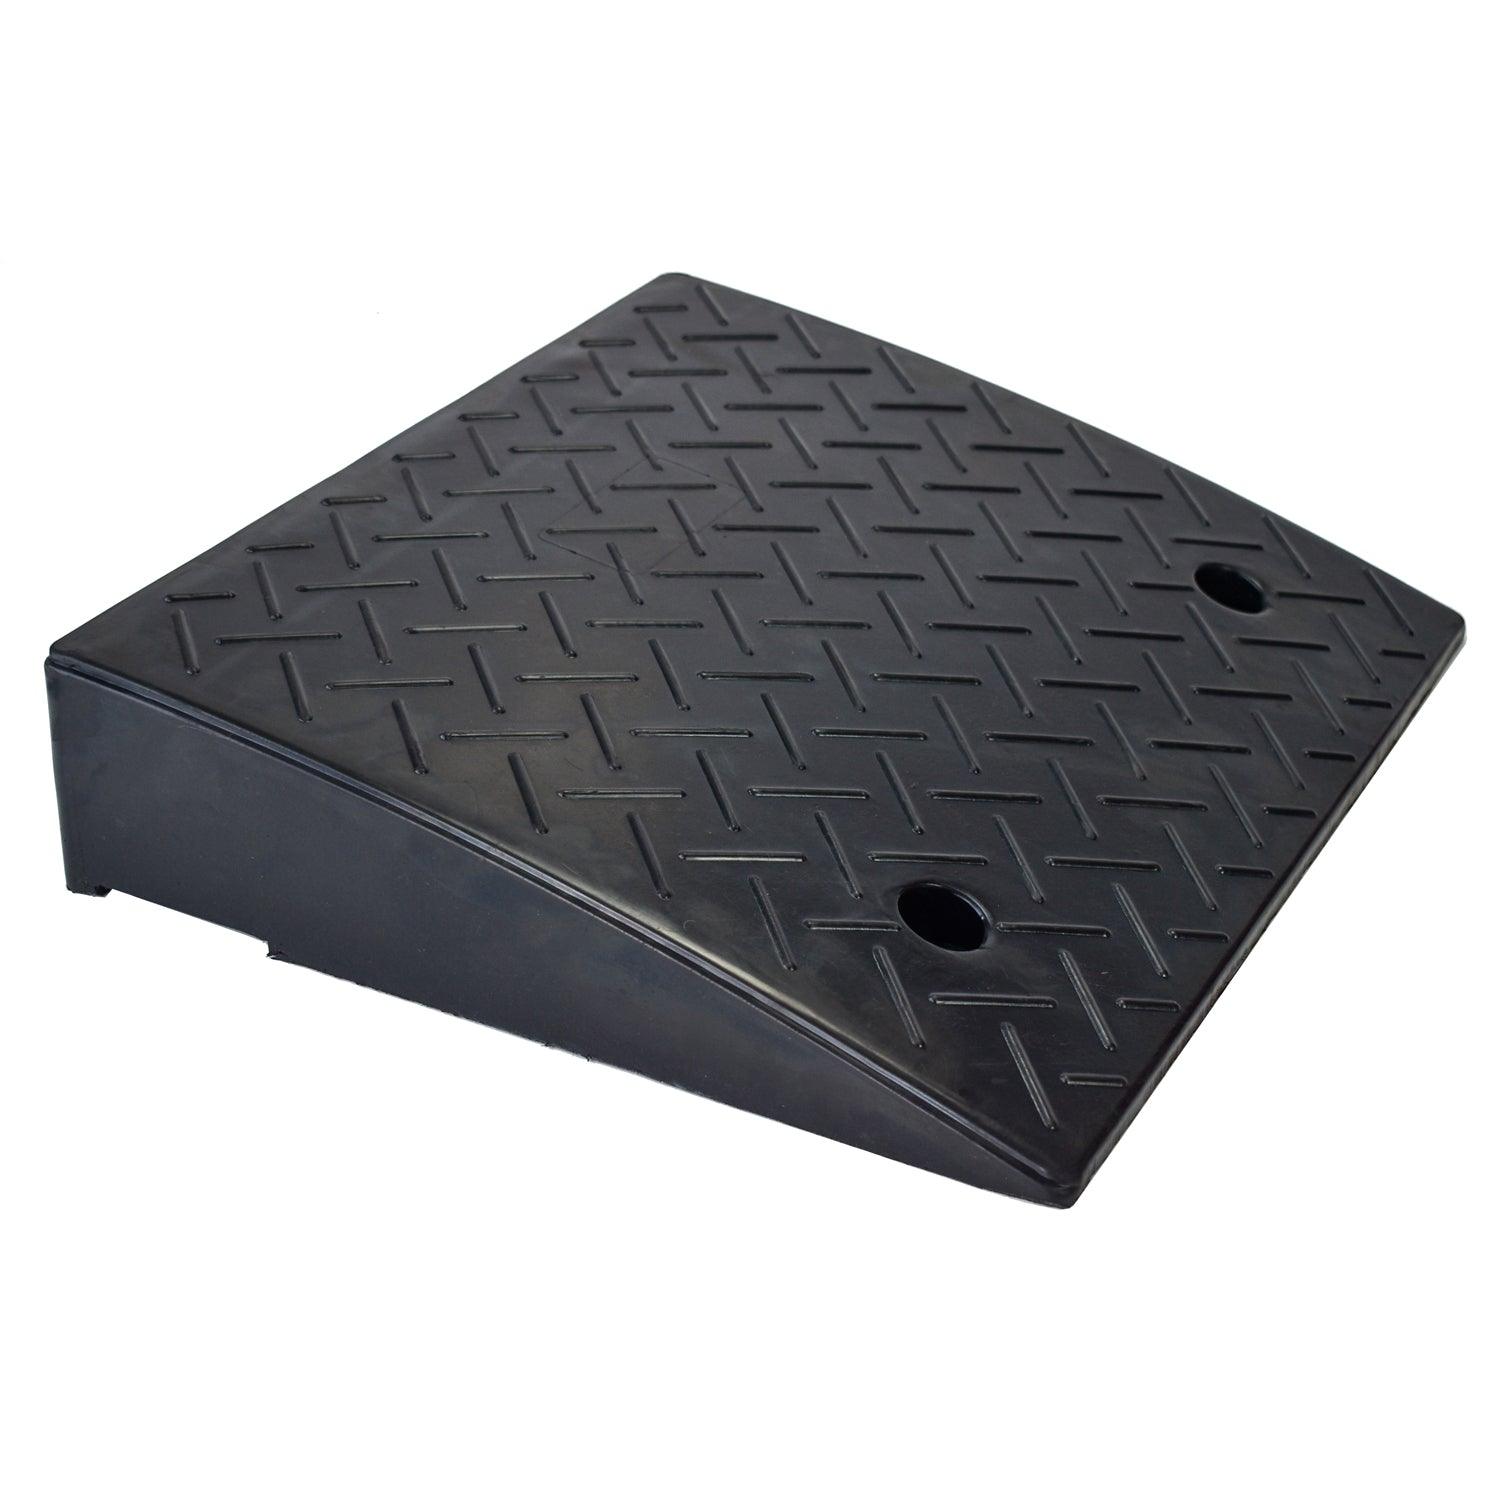 18.9“ Rubber Curb Ramp Kerb Slope Weight Capability 20 Tons for Truck - JACKWIN-Traffic Safety Products Manufacturer in China